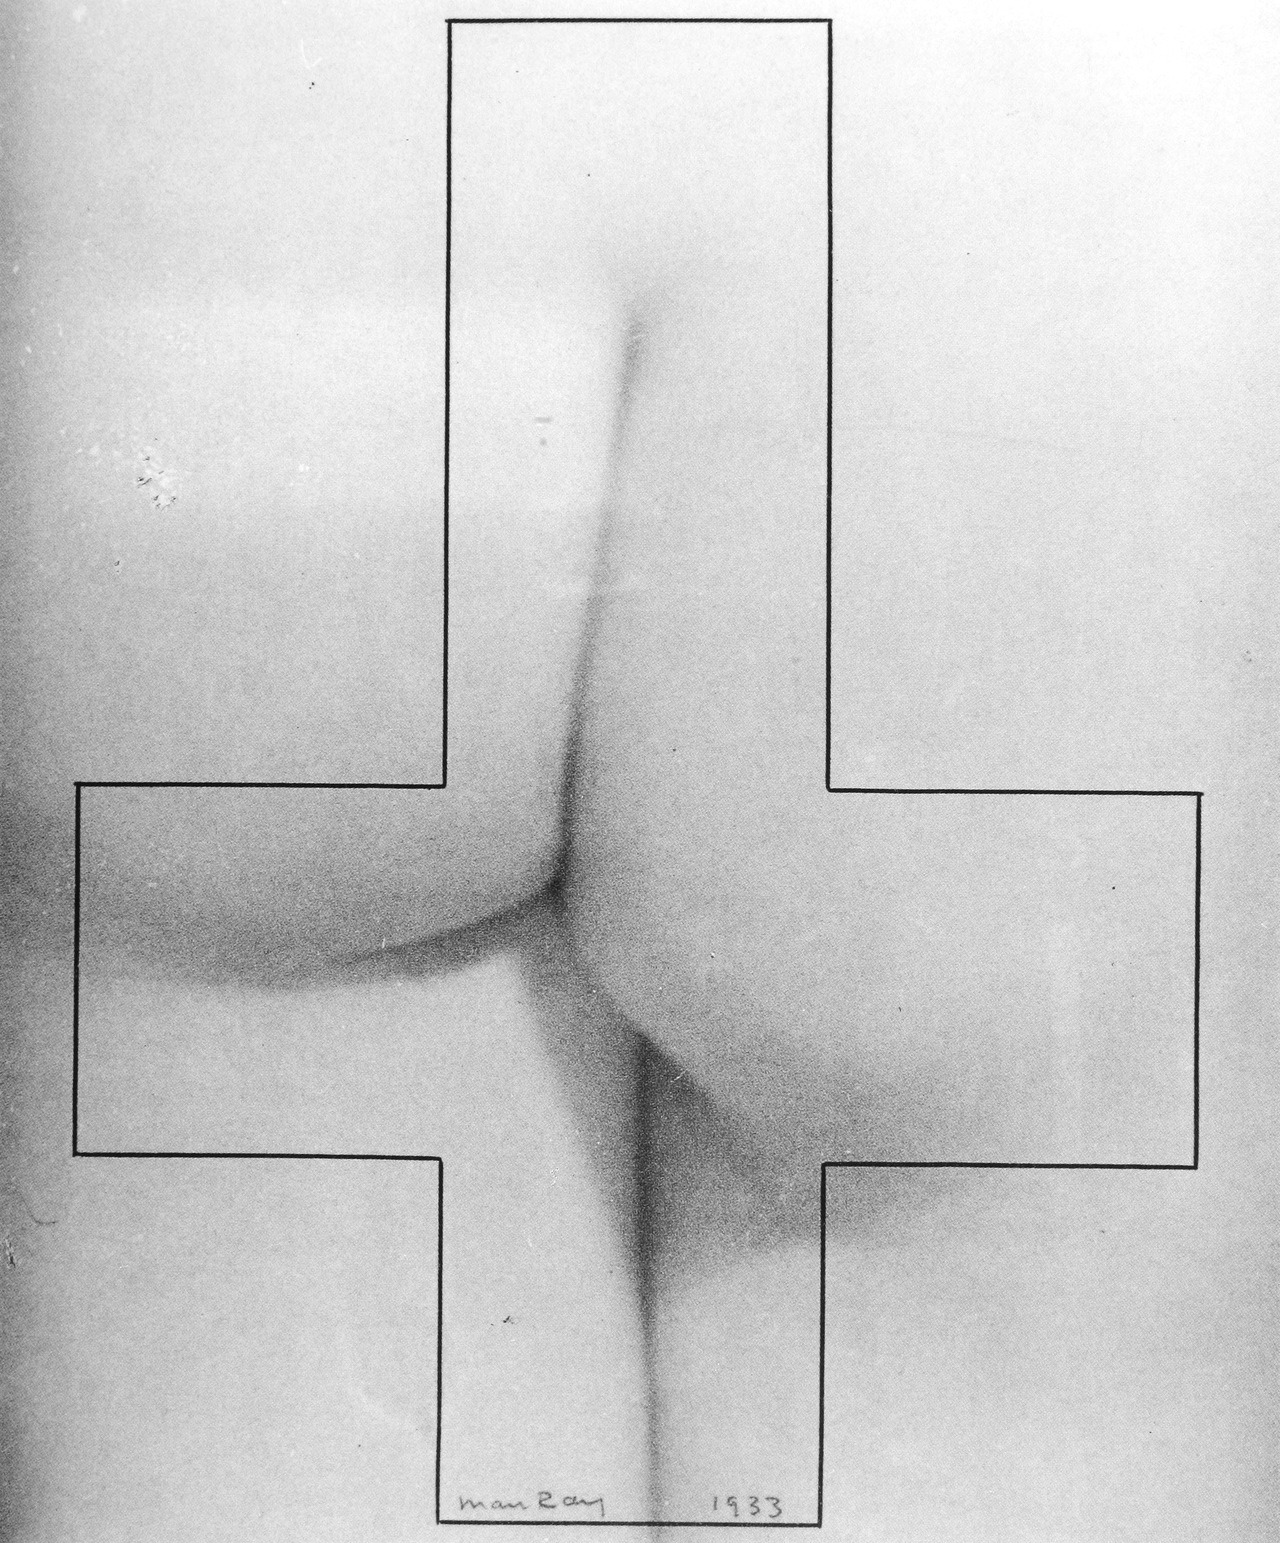 Madonna owns Man Ray's Monument to D.A.F. Sade (1933)